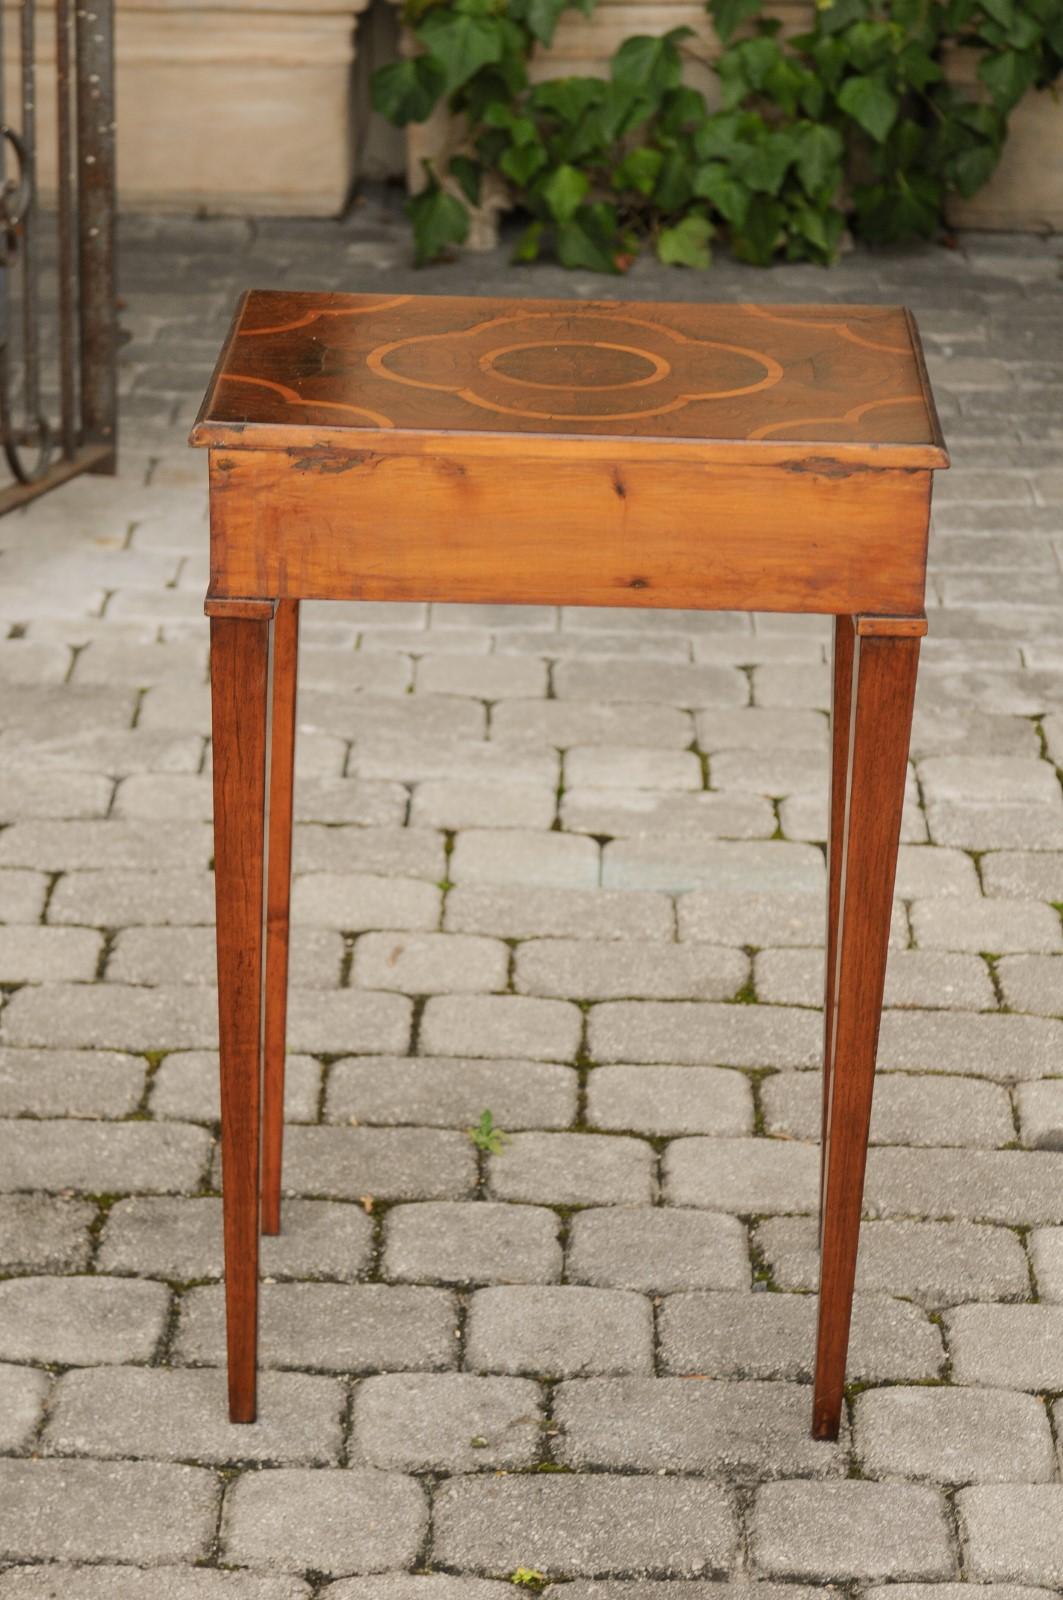 Italian 1820s Walnut Side Table with Oyster Veneer and Inlaid Quadrilobe Motif For Sale 3